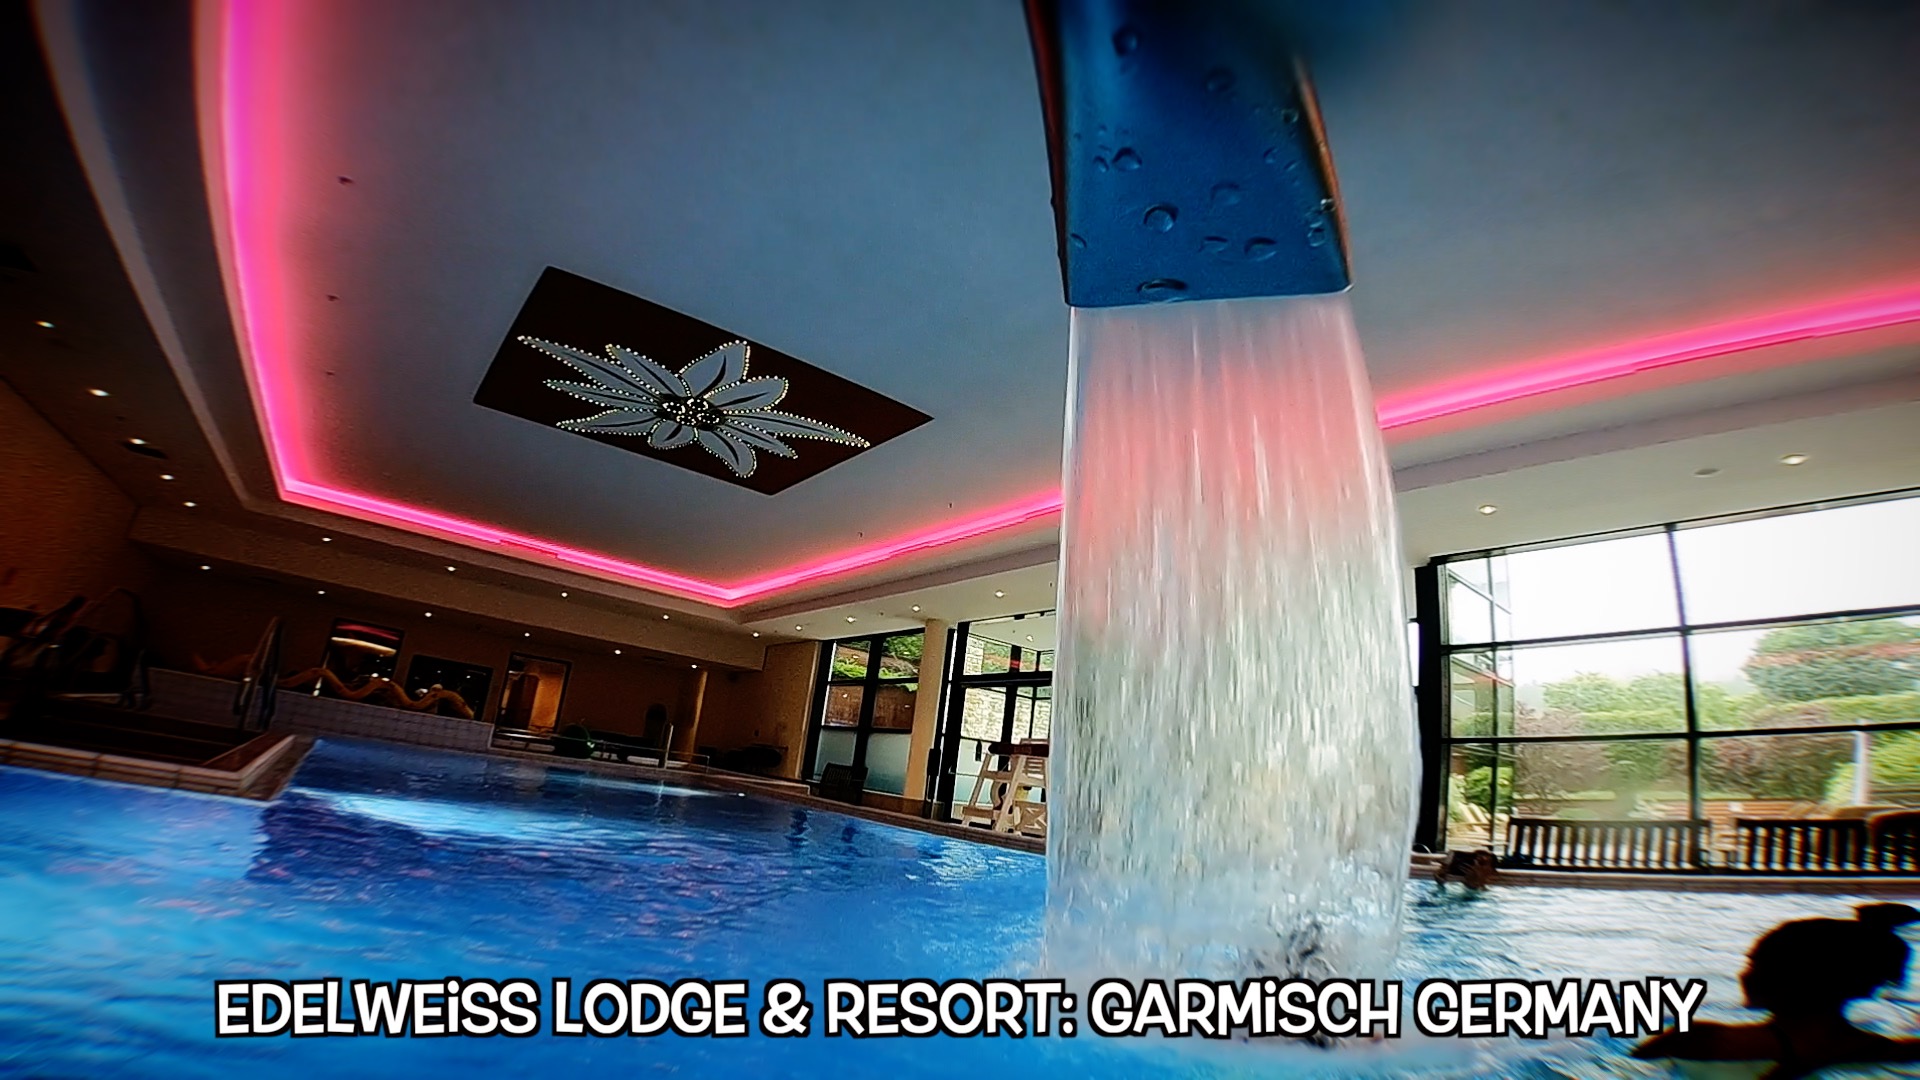 There are plenty of pools for the adults and the kids to enjoy at Edelweiss Lodge and Resort